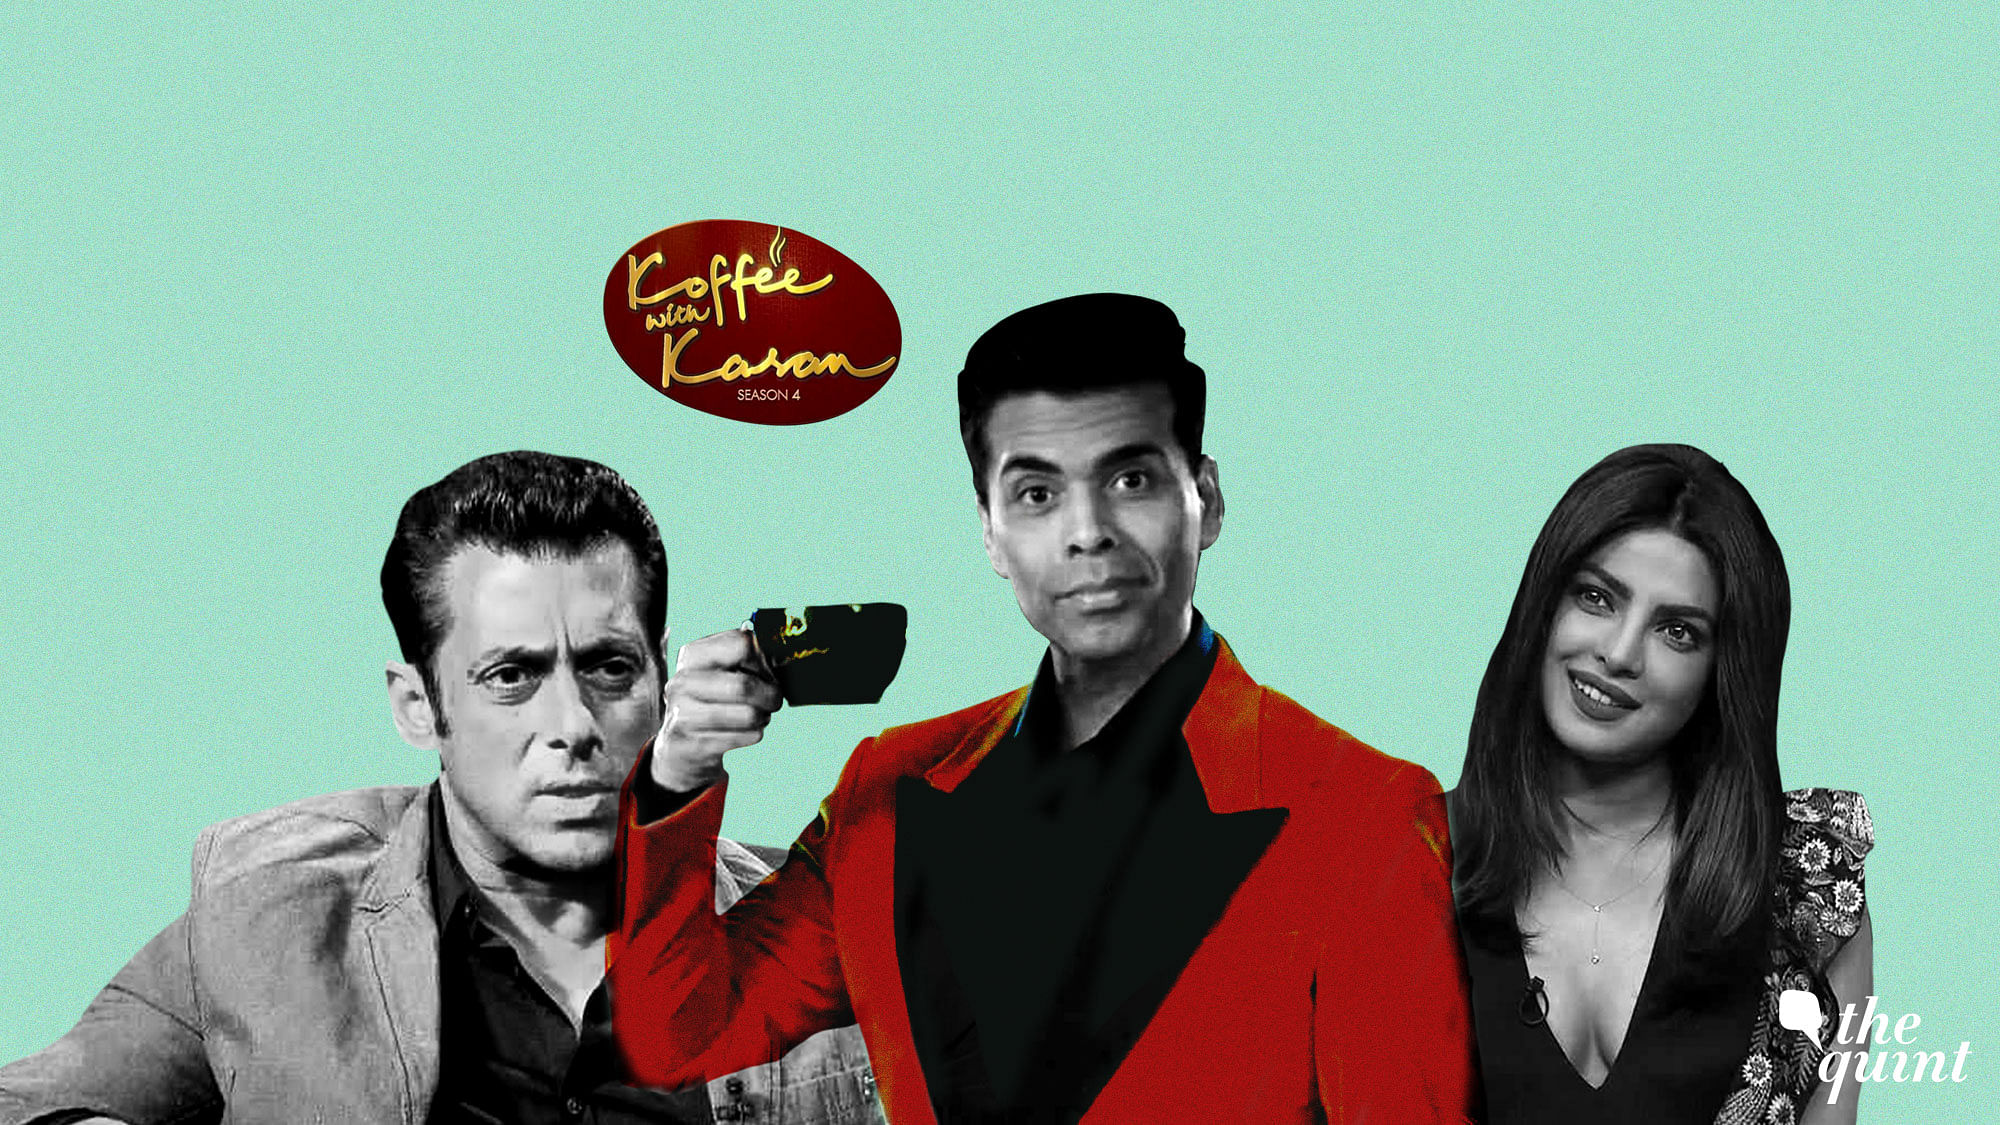 These celebrity guests could make that cup of koffee really hot.&nbsp;